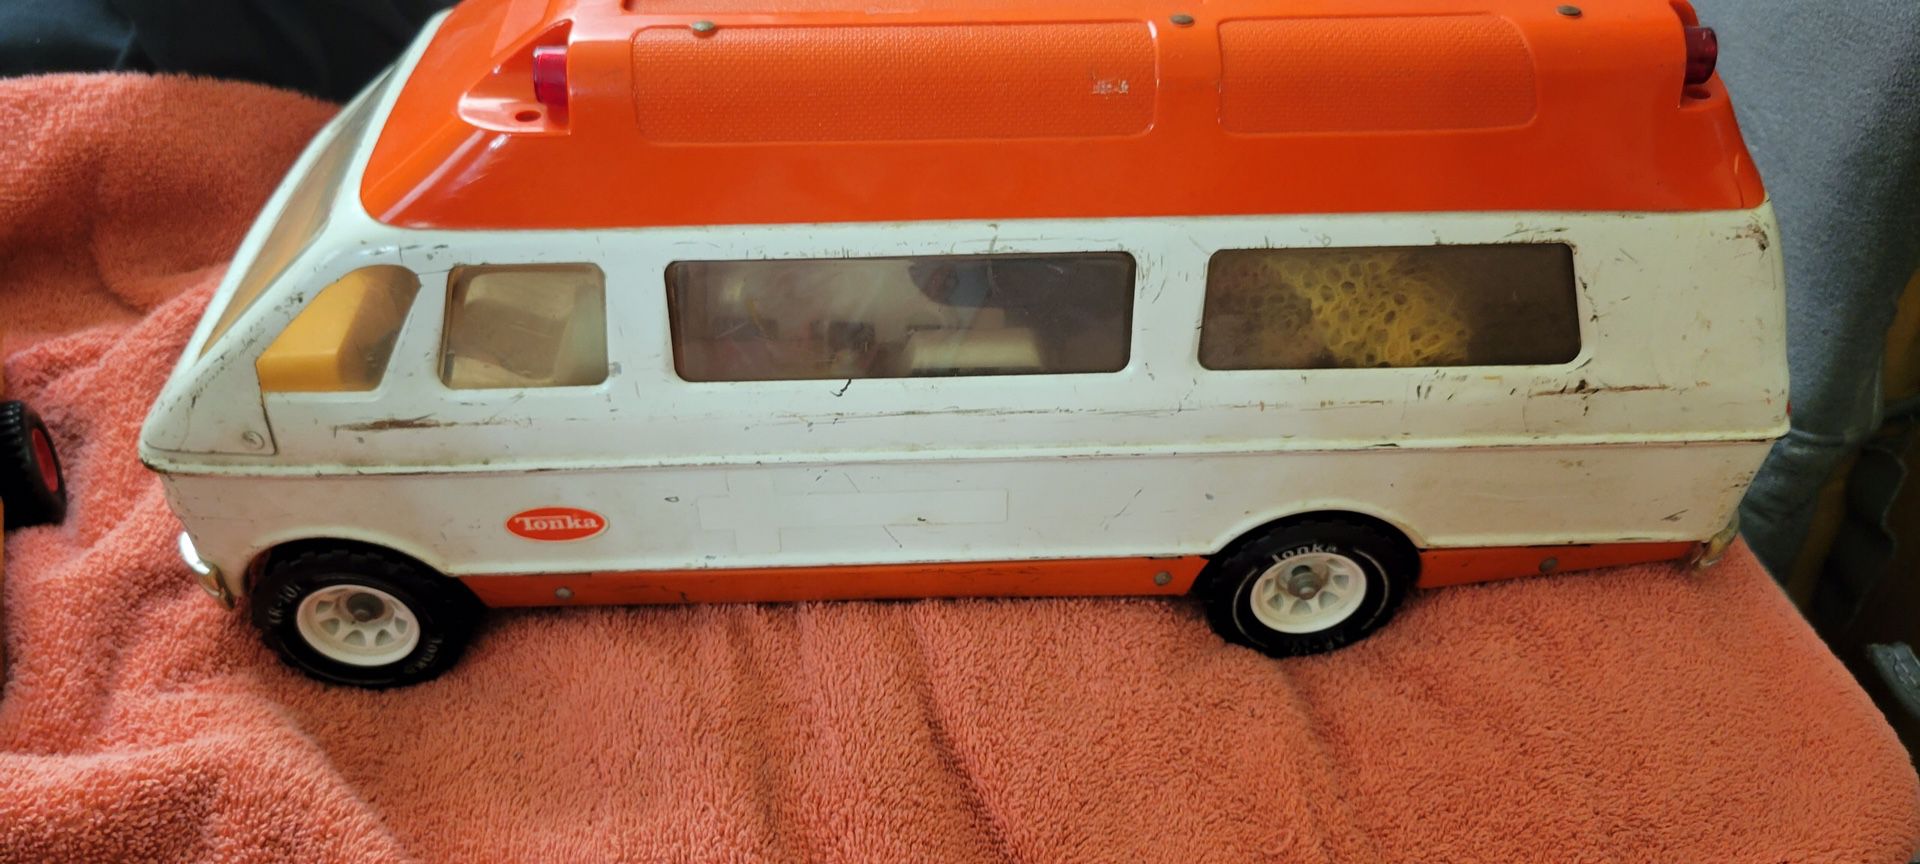 1970s  Vintage Rescue Van With Dolls And Stretcher